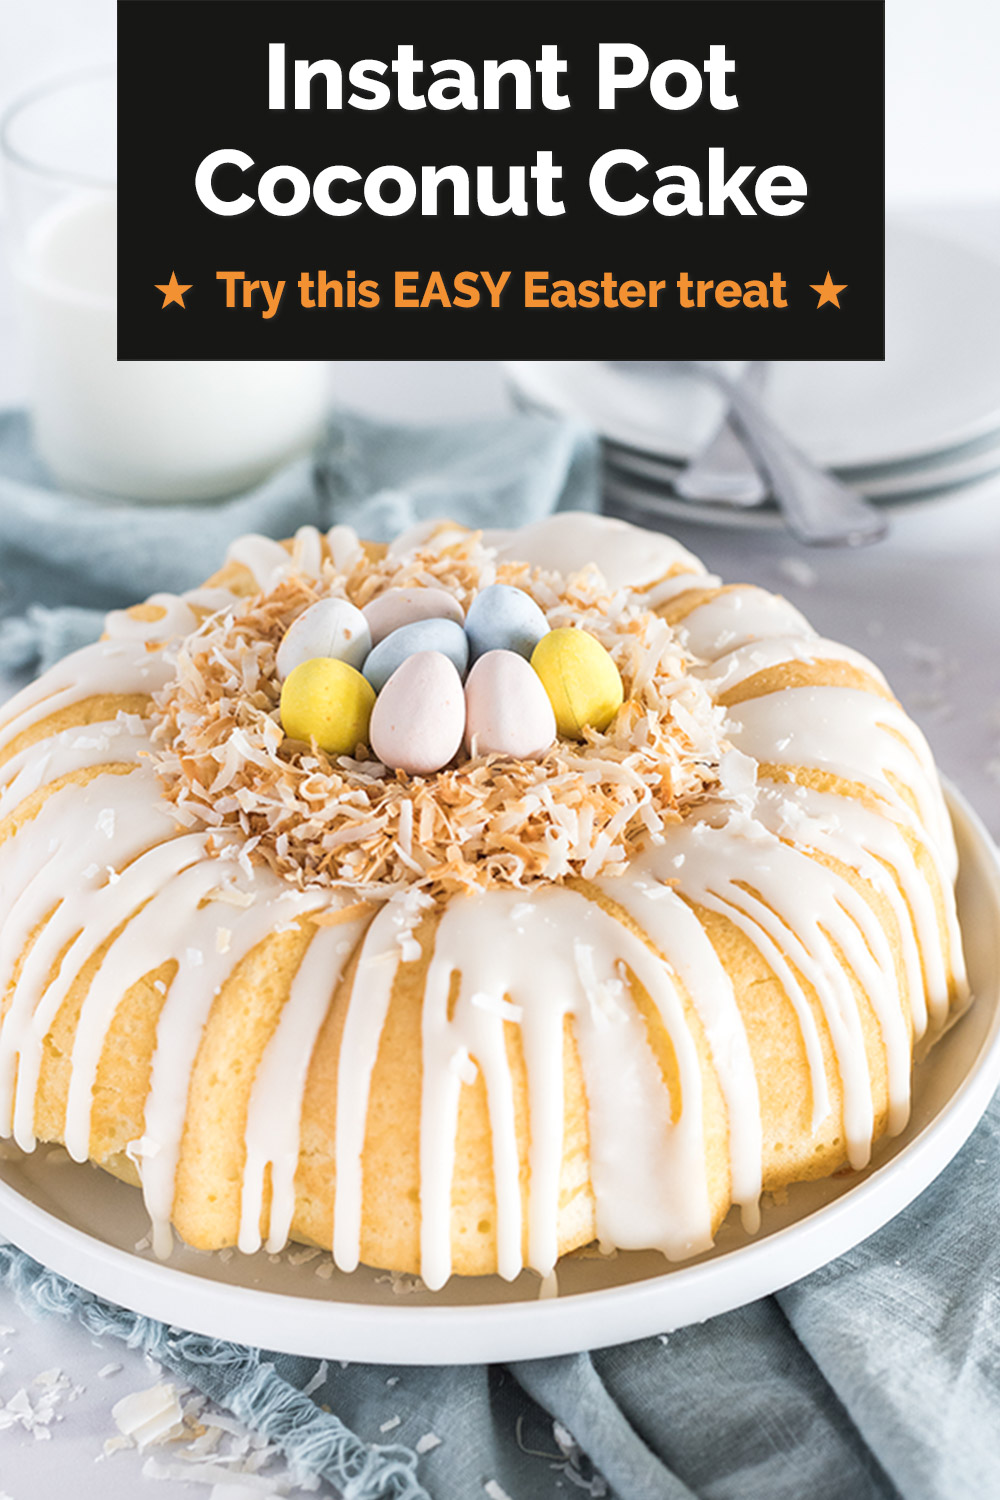 This EASY Easter dessert is a perfect addition to your family's Easter table this year. Use coconut to make a fun "nest" for your cadbury mini eggs. Plus, this shortcut Instant Pot recipe "bakes" up quick in your Instant Pot, so your oven is free for other parts of your Easter dinner. via @PressureCook2da